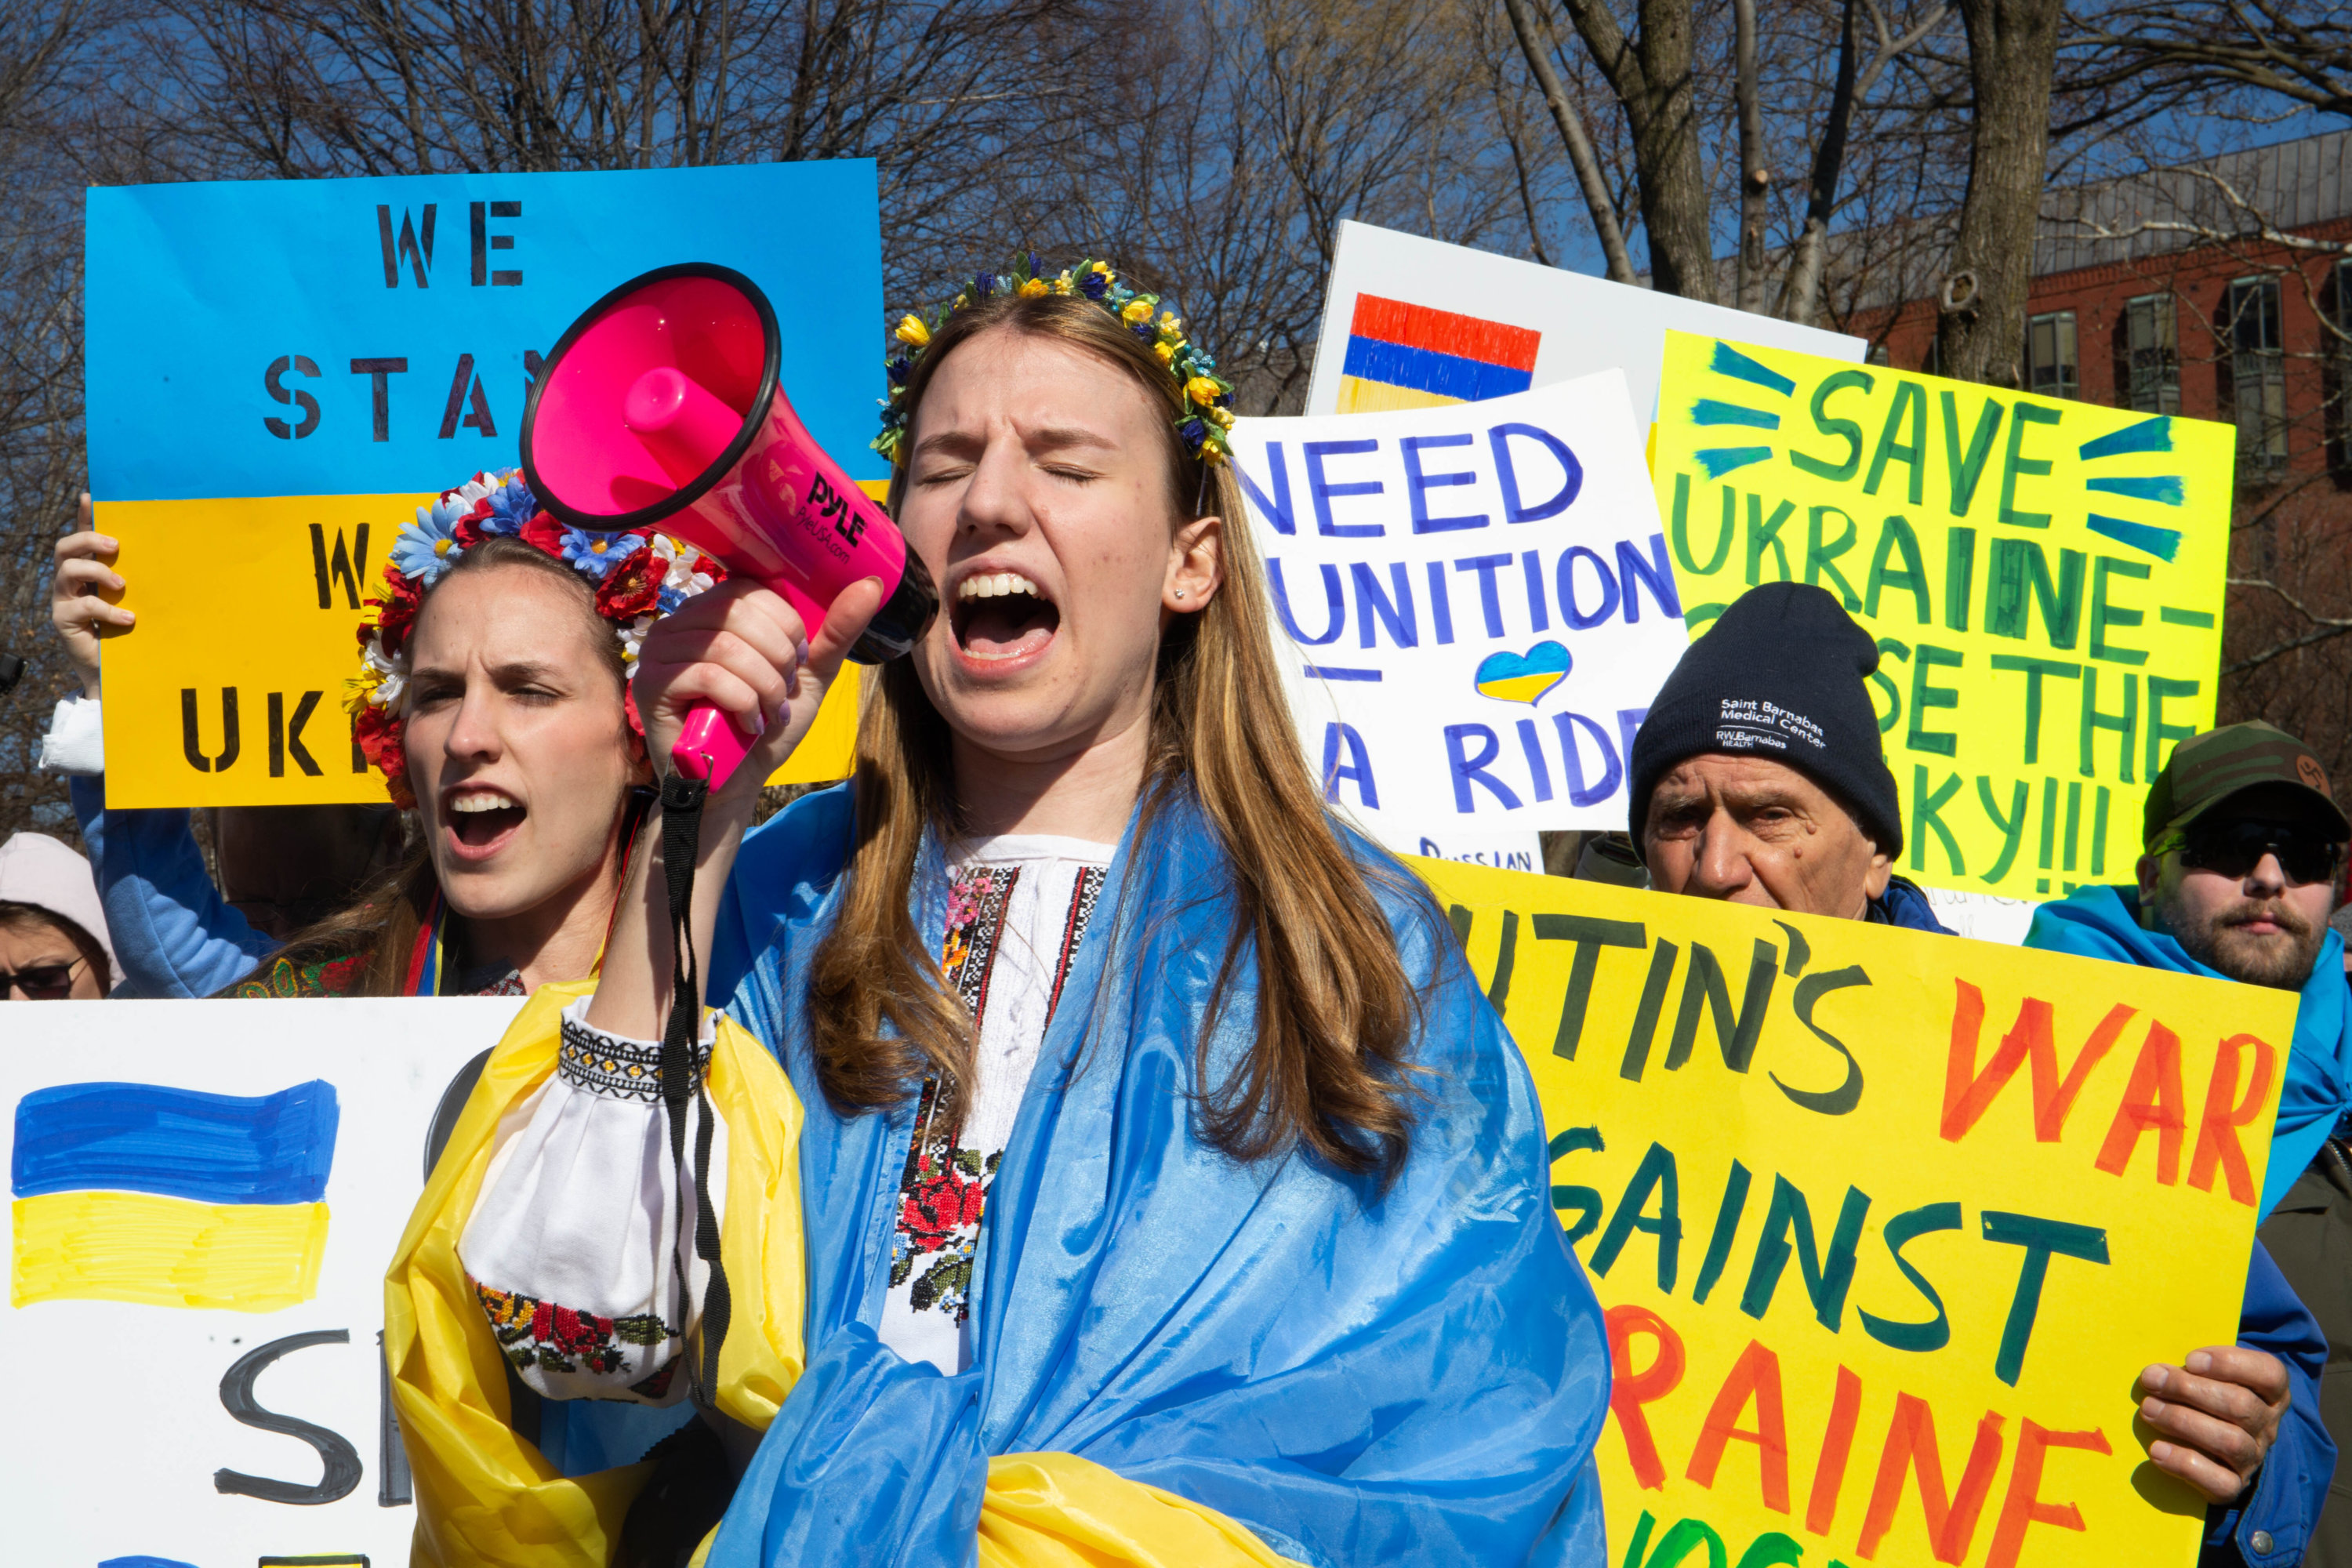 February 27: A rally in support of Ukraine outside the White House. 